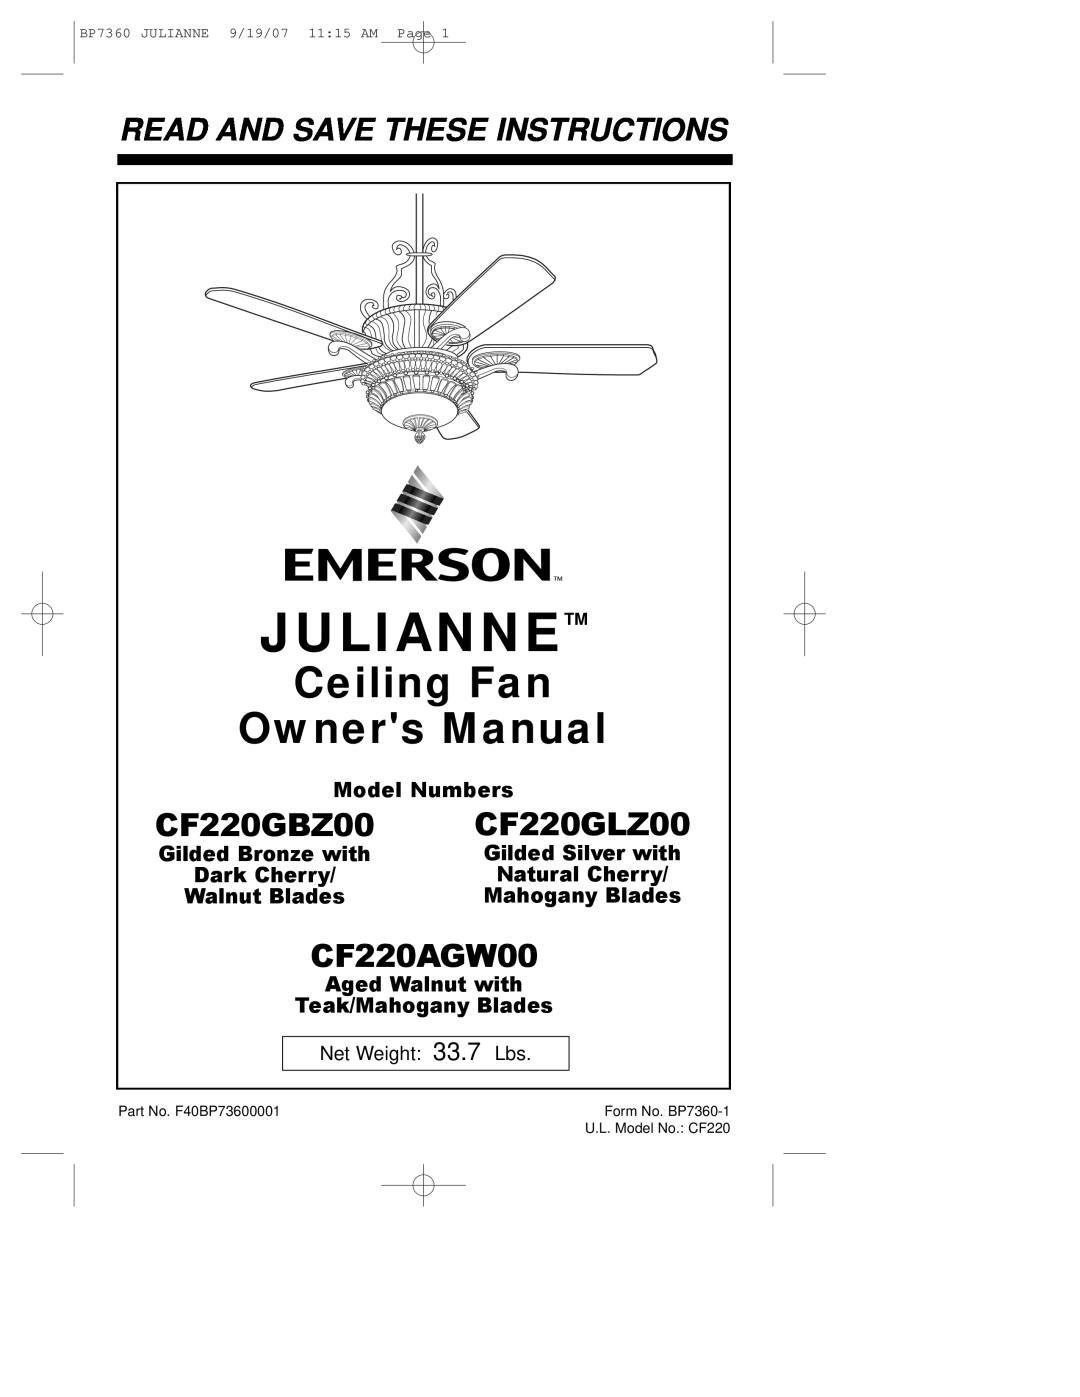 Emerson CF220GLZ00 owner manual Julianne, CF220AGW00, Read And Save These Instructions, CF220GBZ00, Model Numbers 